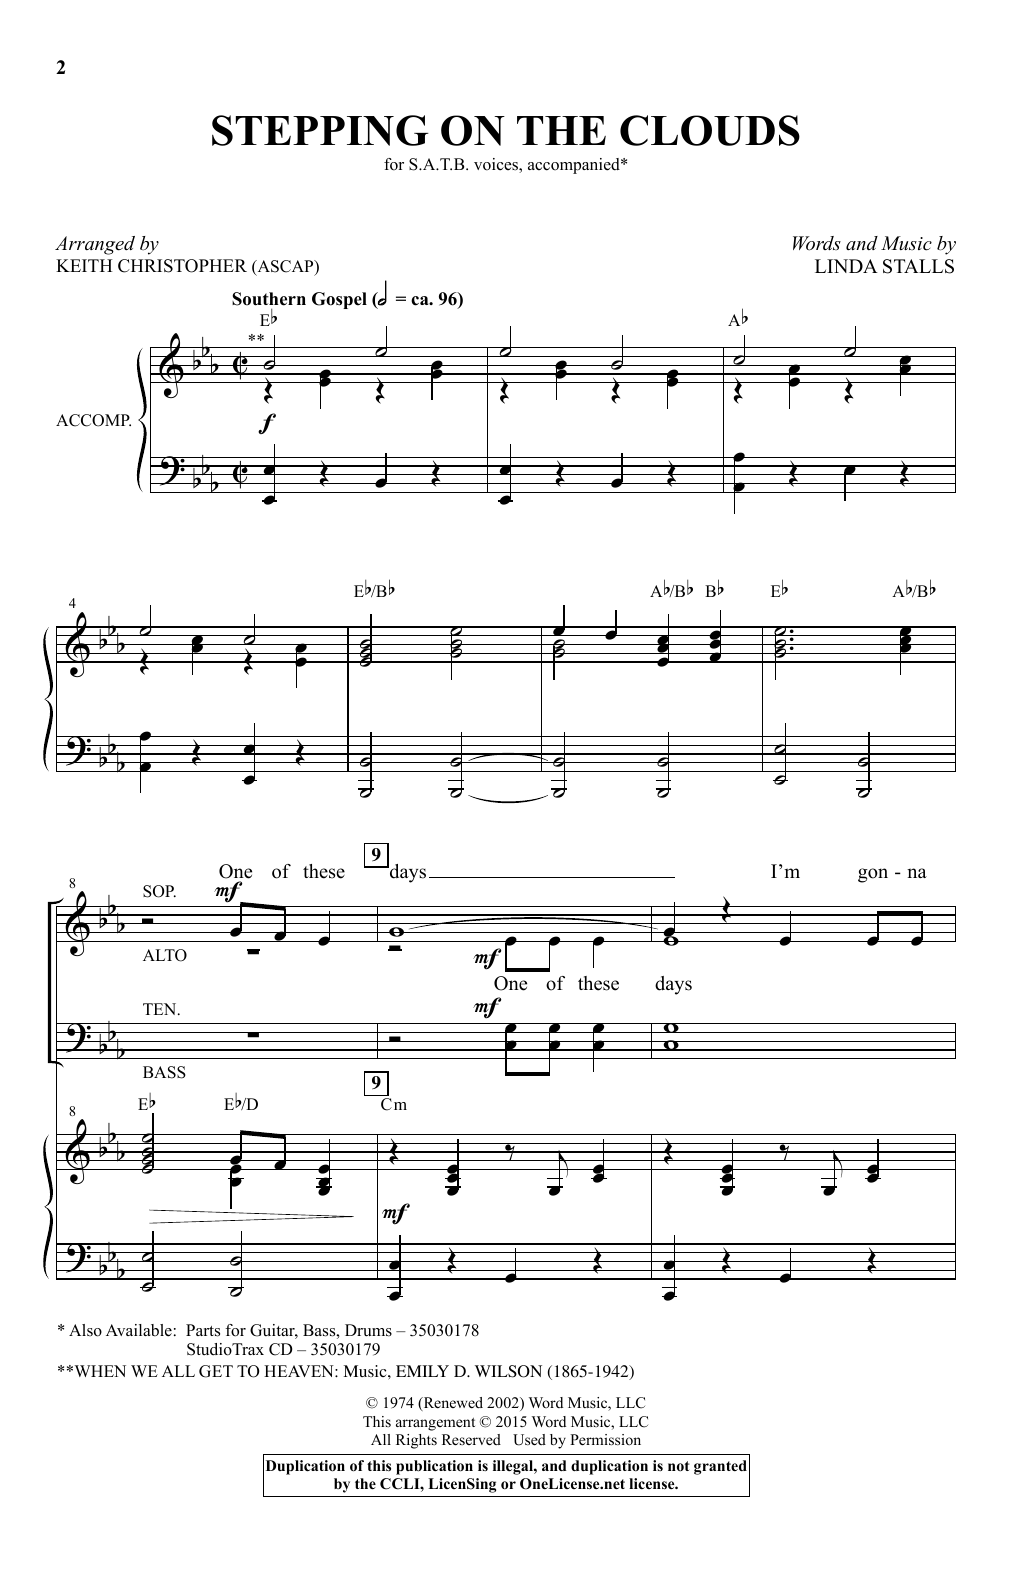 Download Keith Christopher Stepping On The Clouds Sheet Music